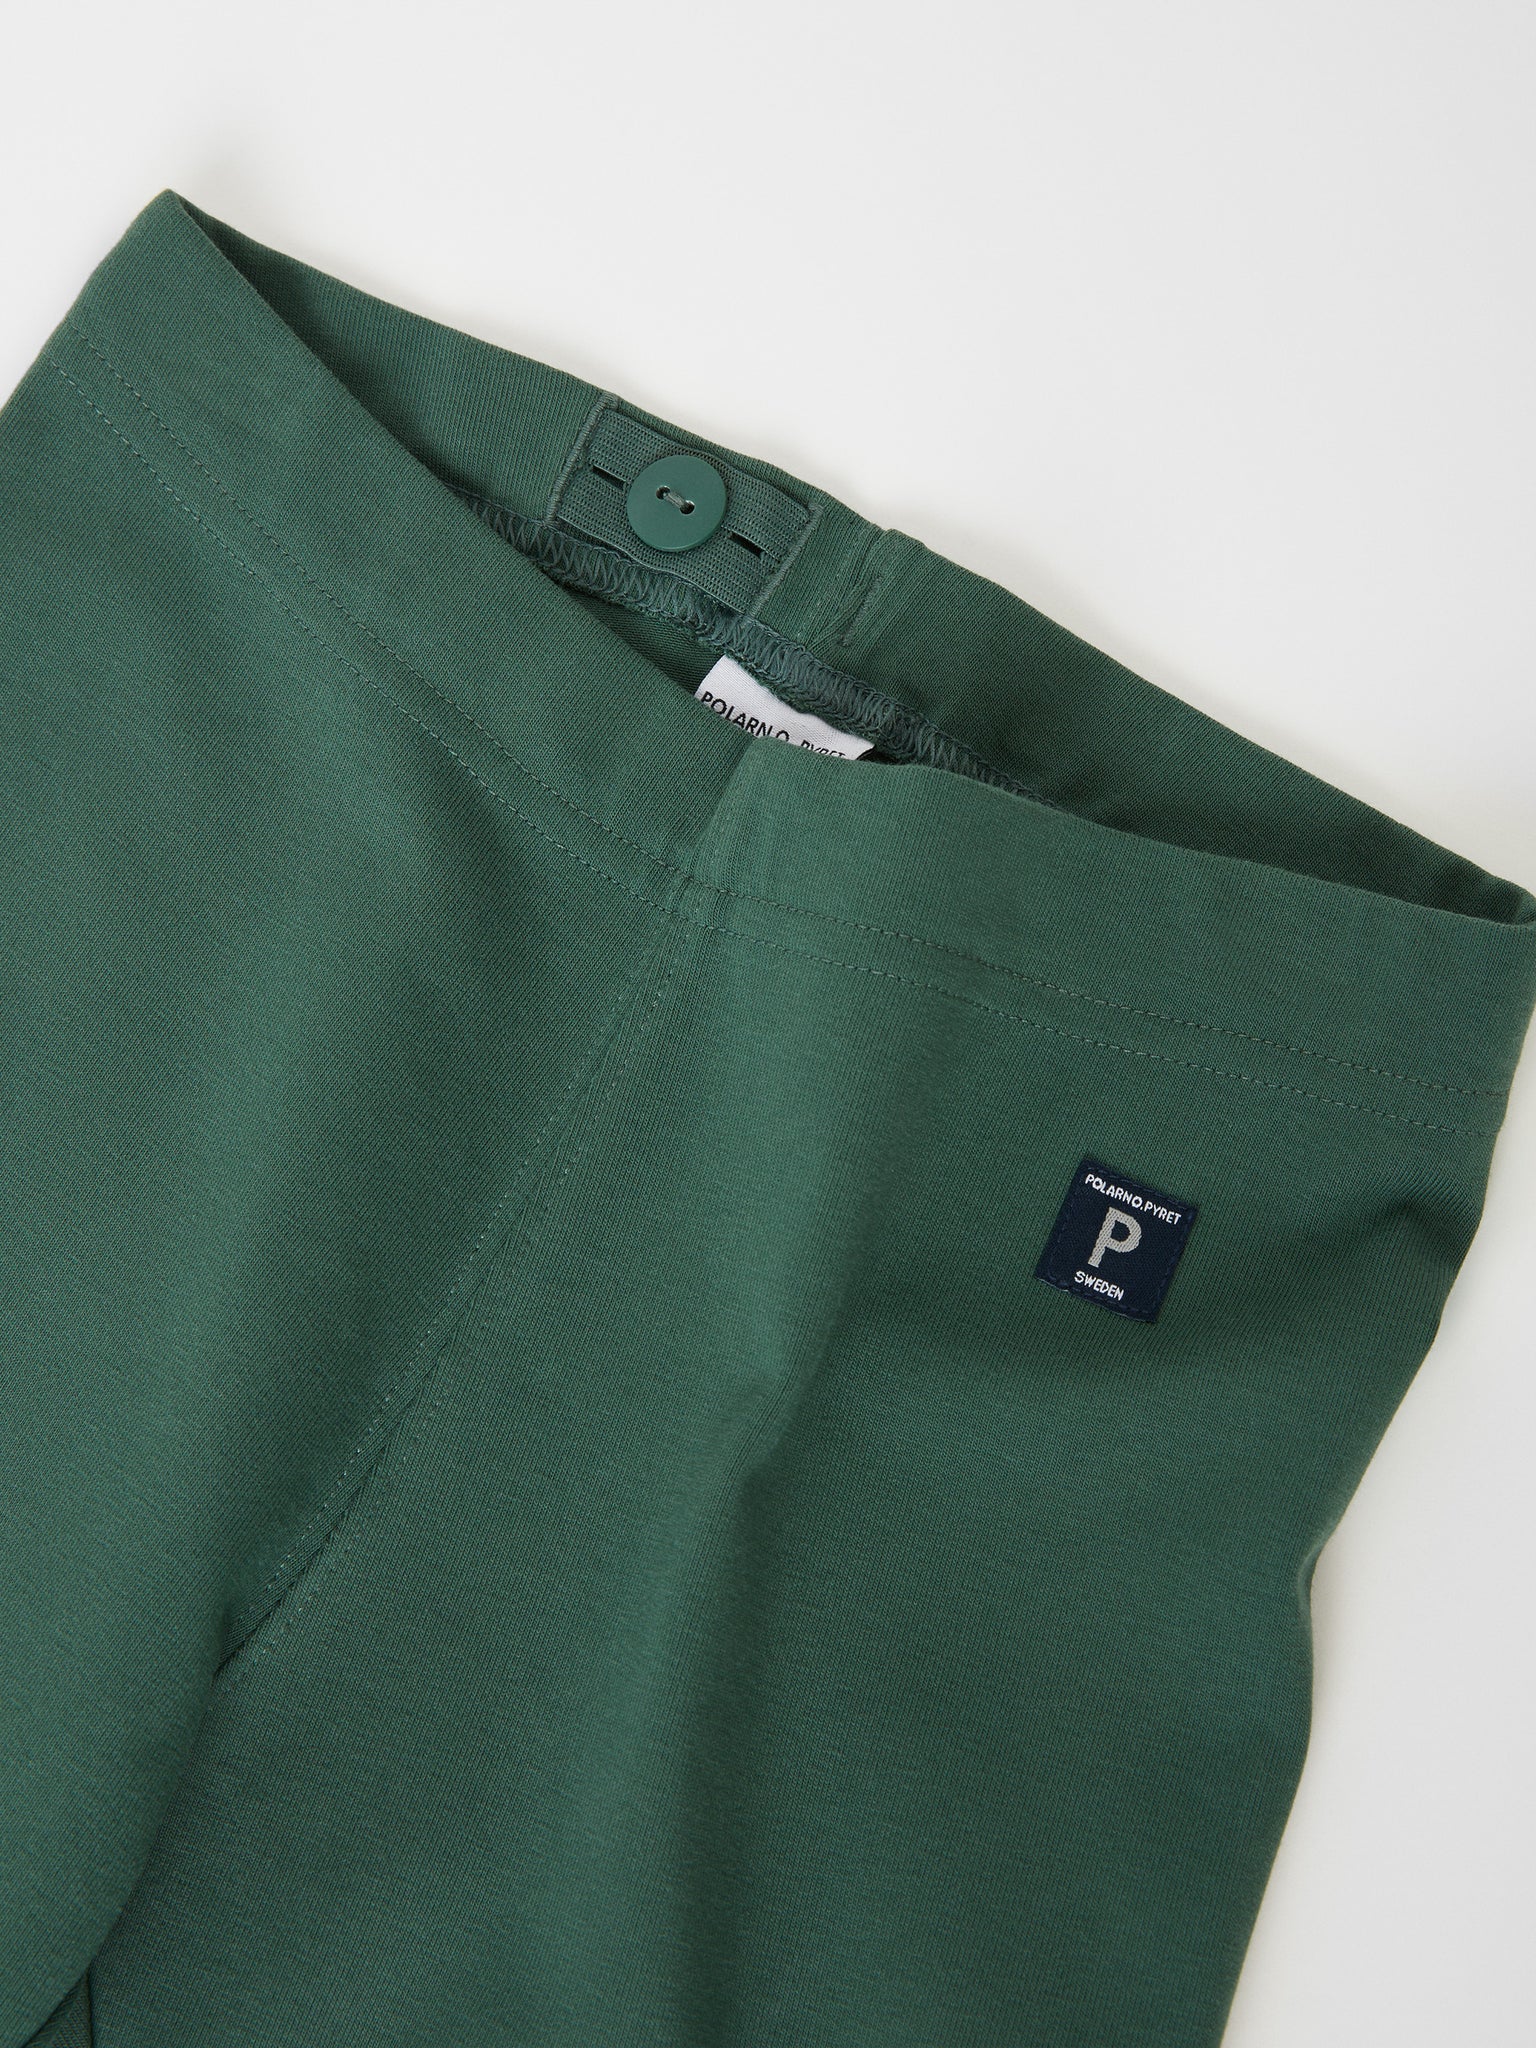 Organic Cotton Green Kids Leggings from the Polarn O. Pyret kids collection. Nordic kids clothes made from sustainable sources.